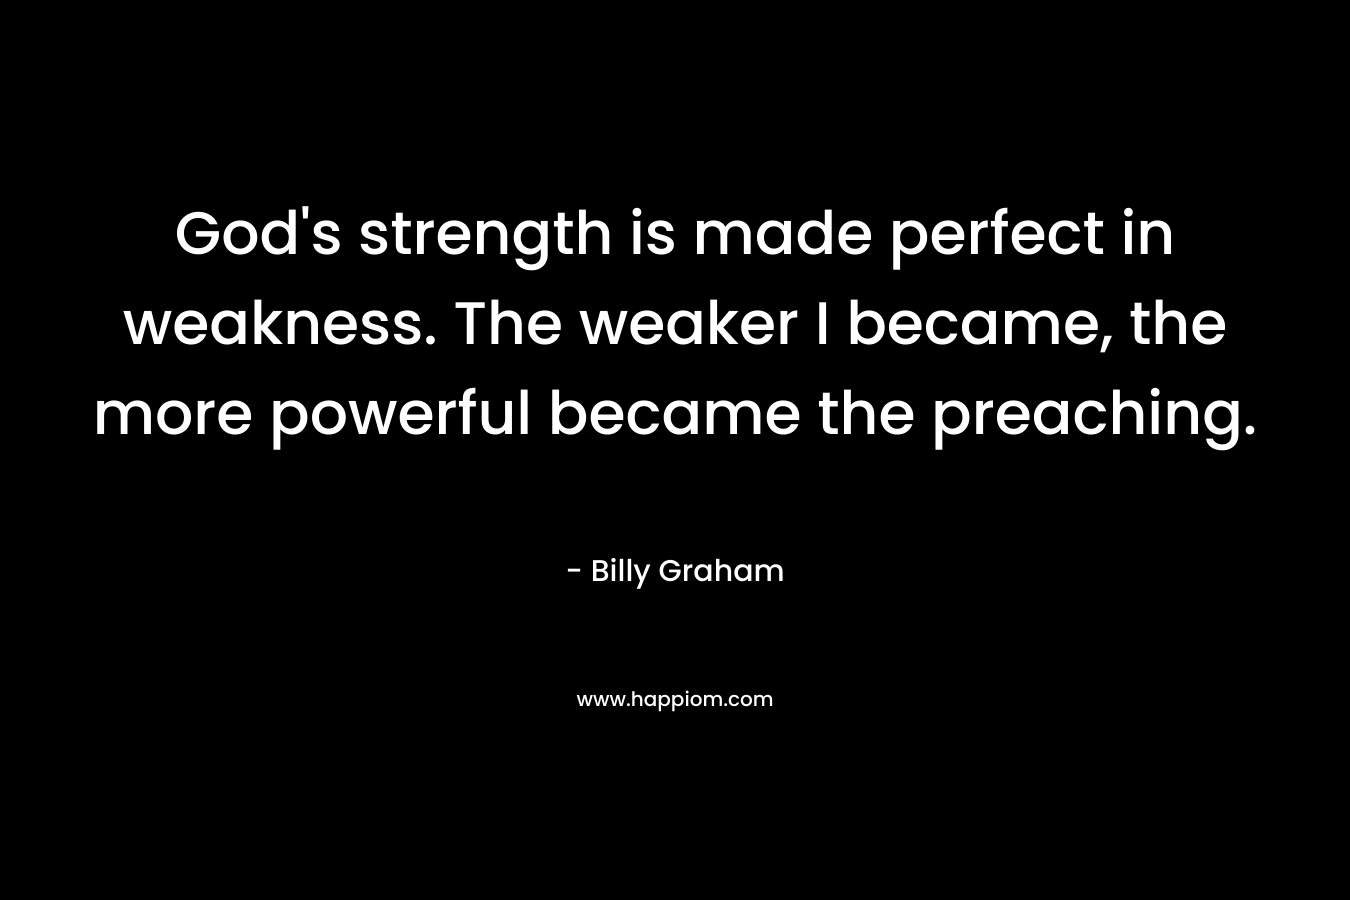 God’s strength is made perfect in weakness. The weaker I became, the more powerful became the preaching. – Billy Graham